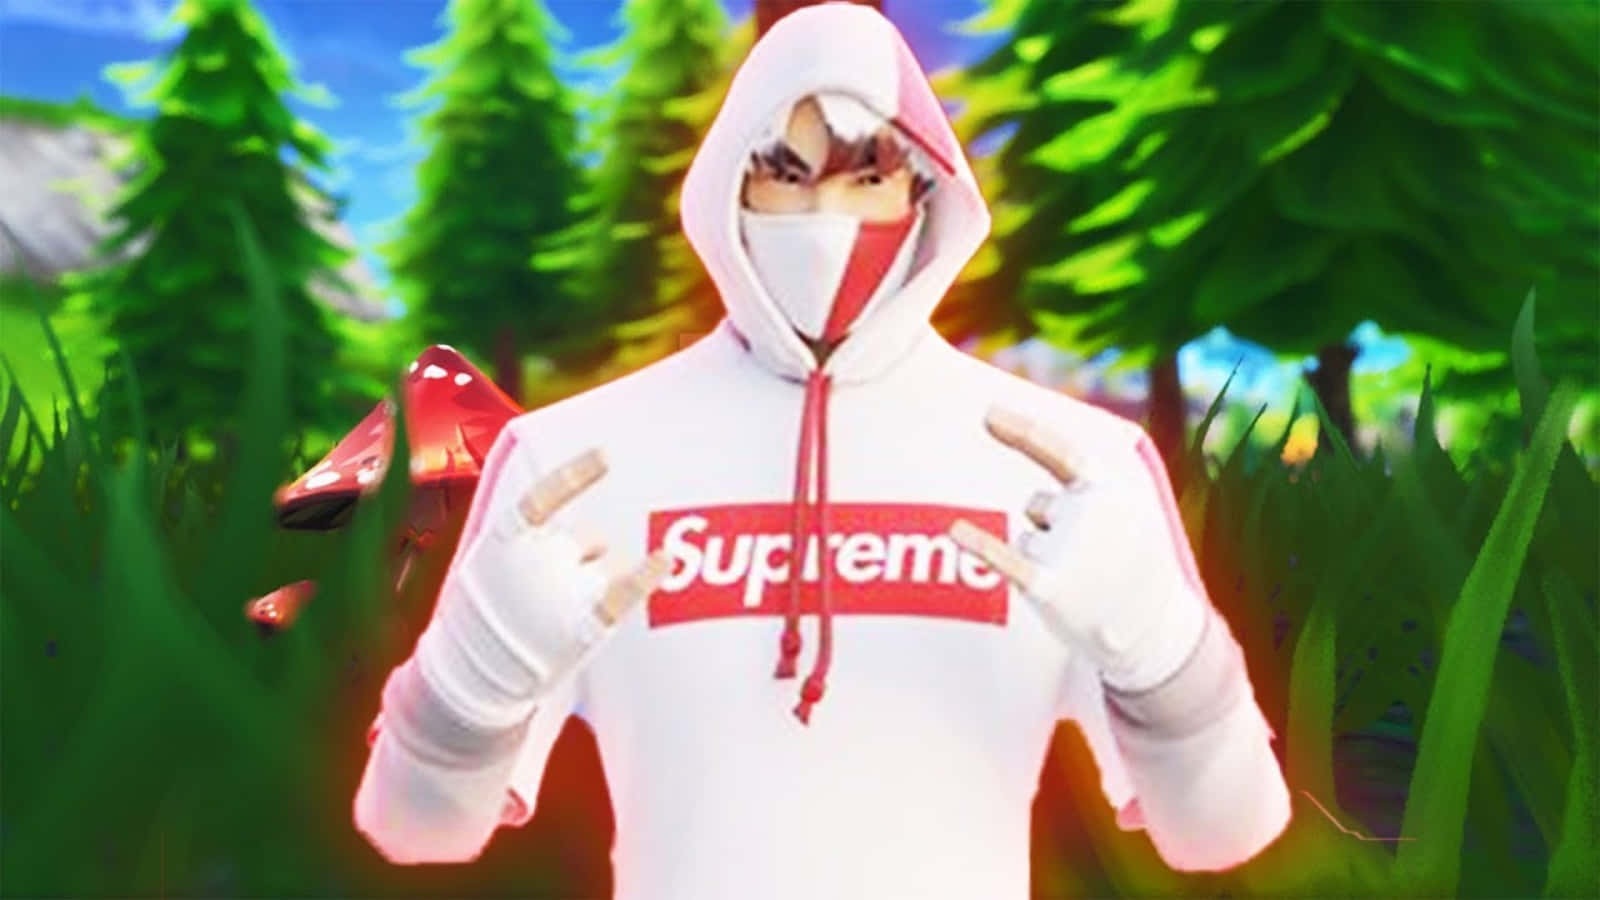 Download Supreme x Fortnite for the ultimate battle experience. Wallpaper